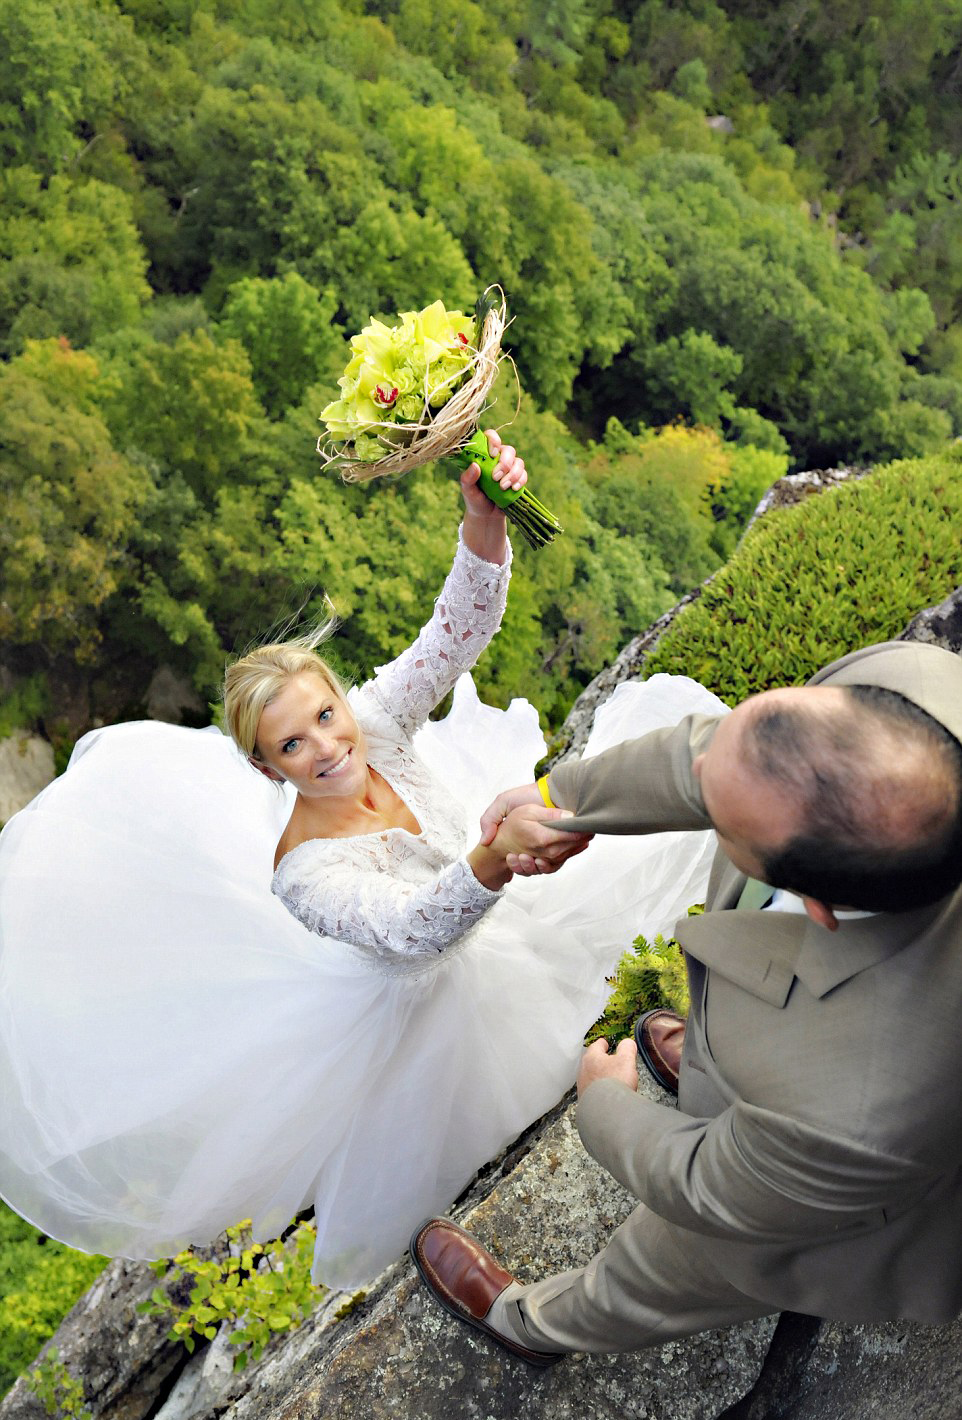 Would you risk your life for the perfect wedding photo Image: Philbrick Photography